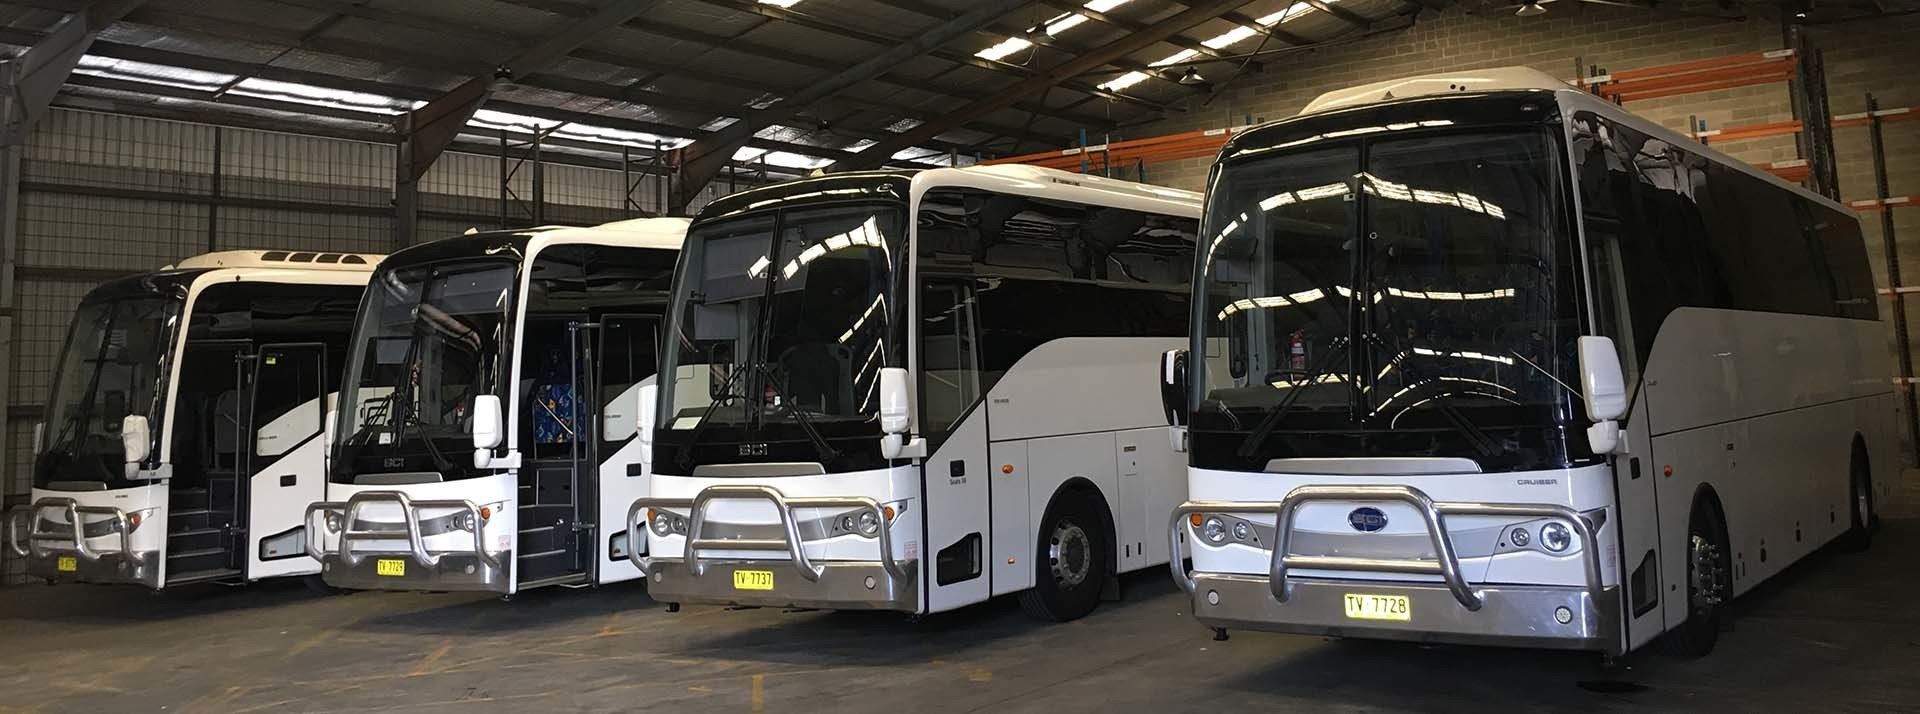 BUS AND COACH HIRE SYDNEY